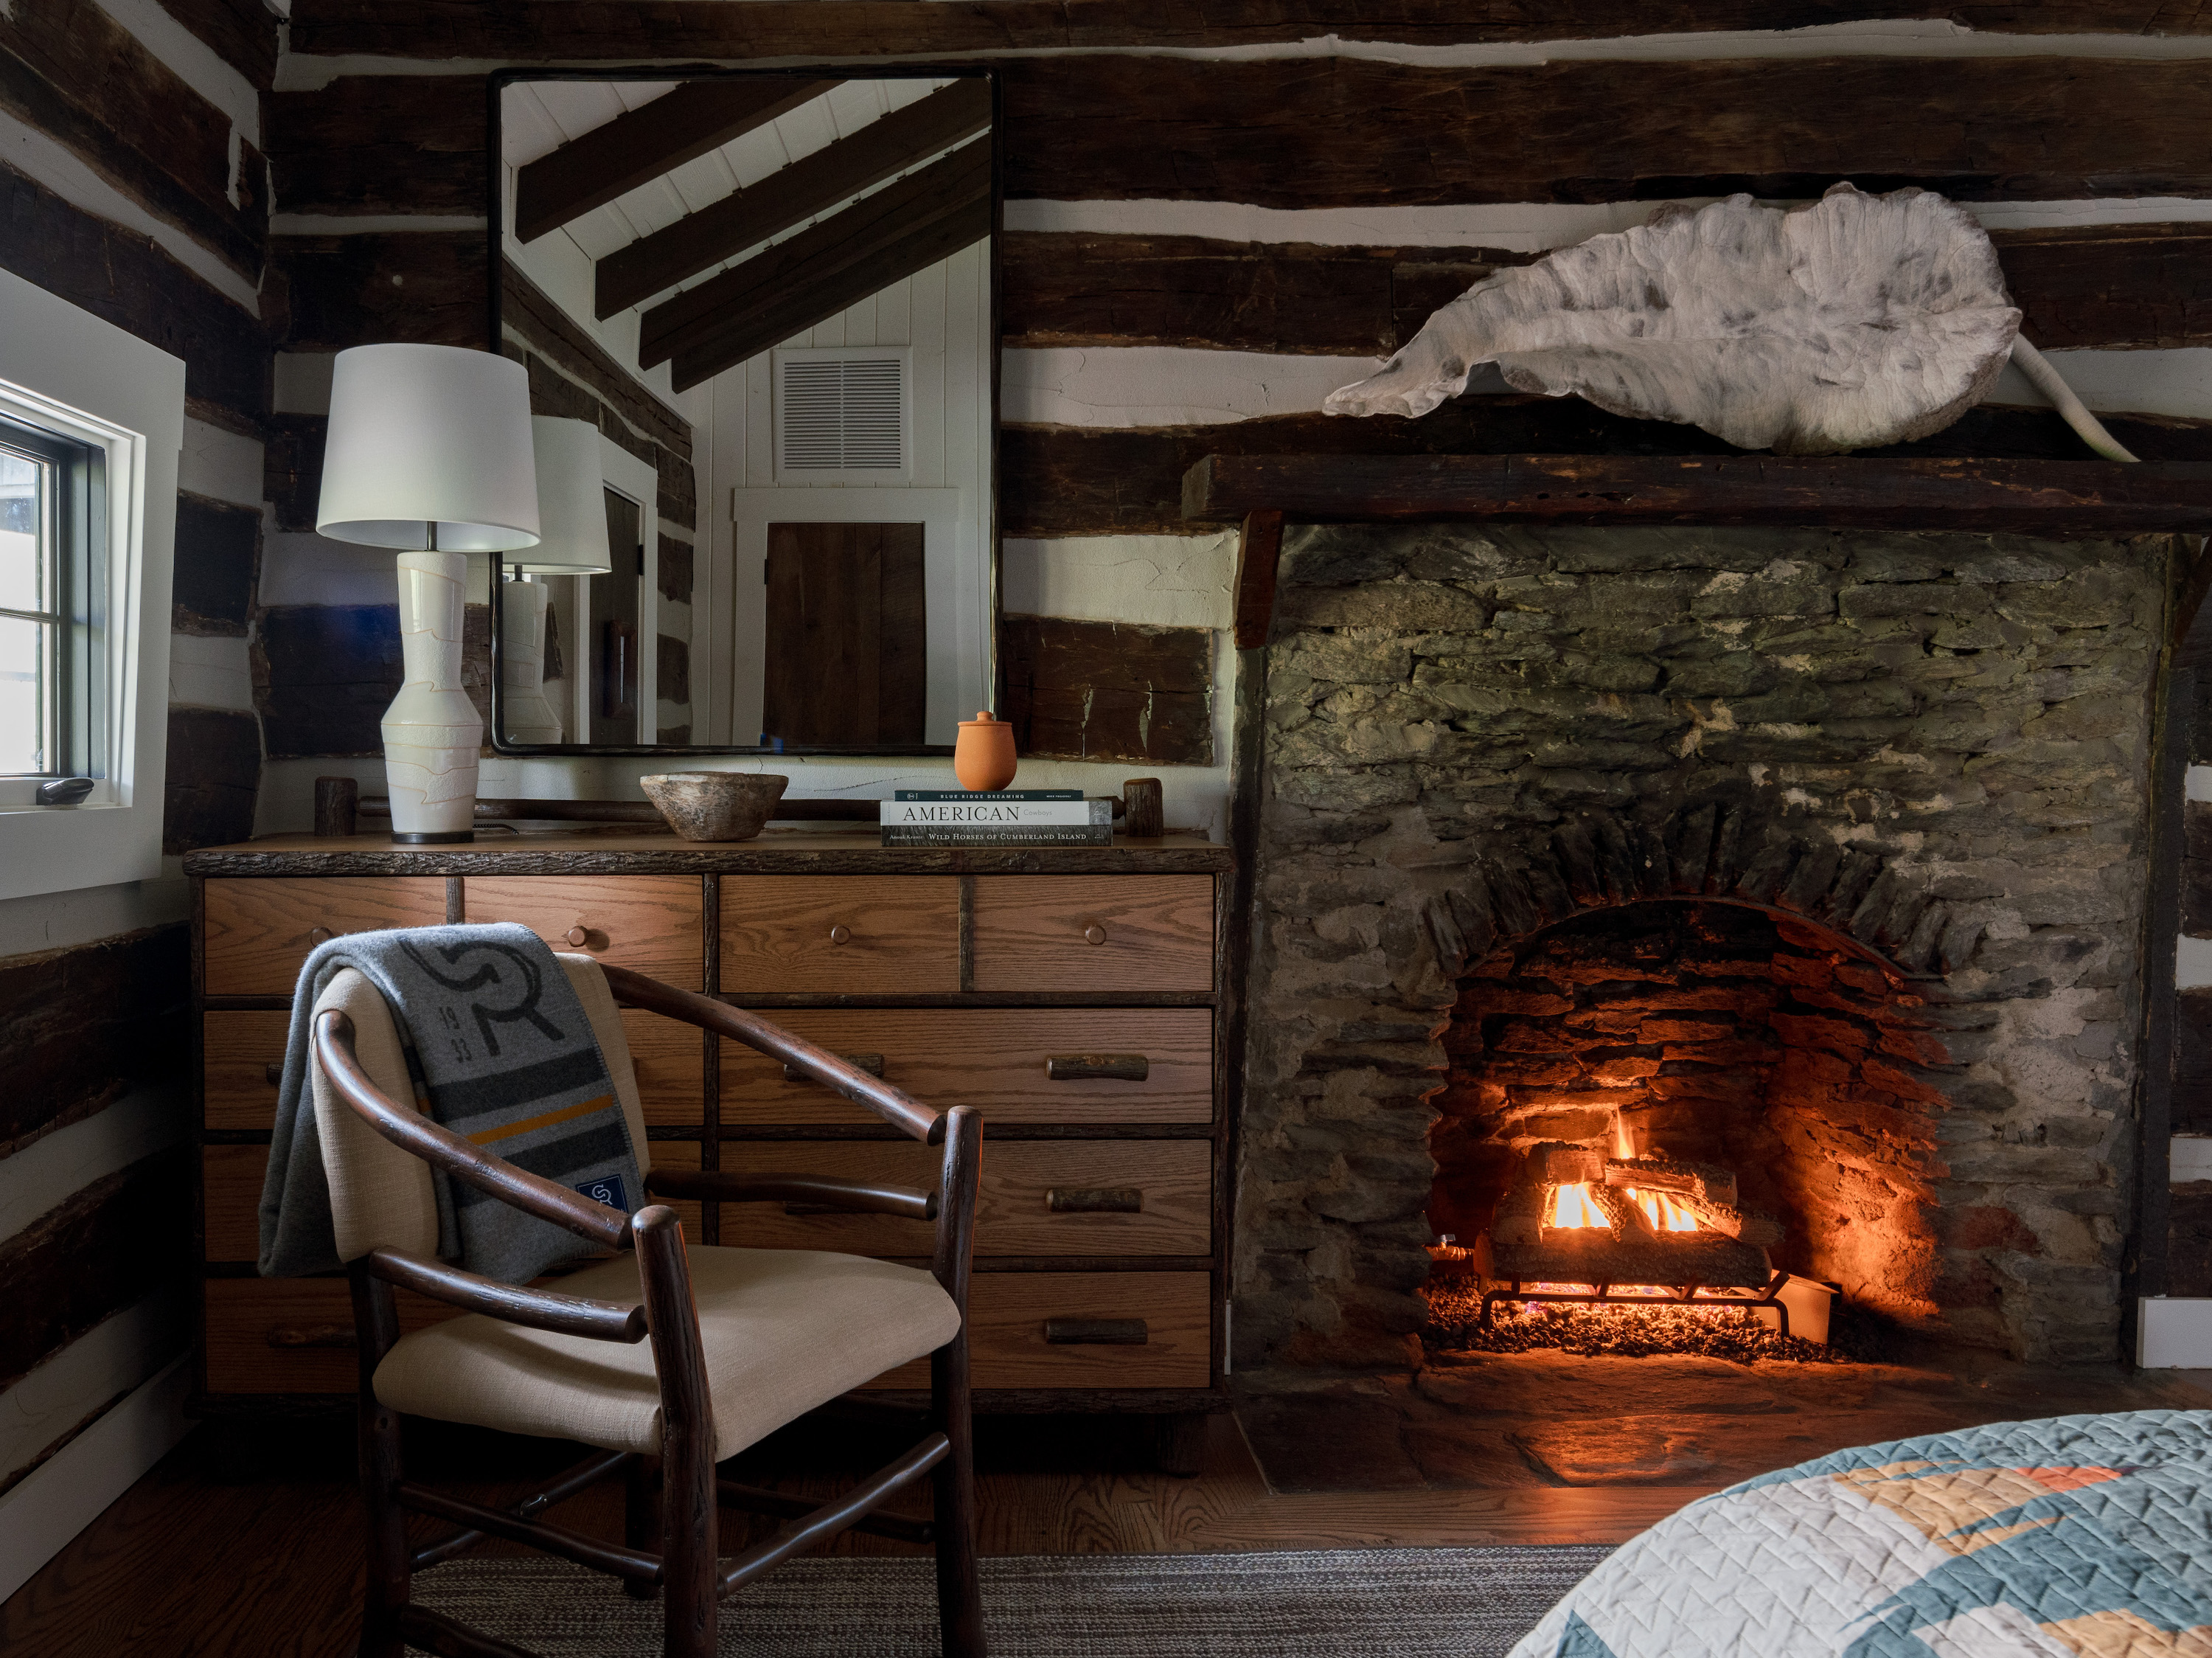 A wall of a guest room with a brick fireplace and chair.